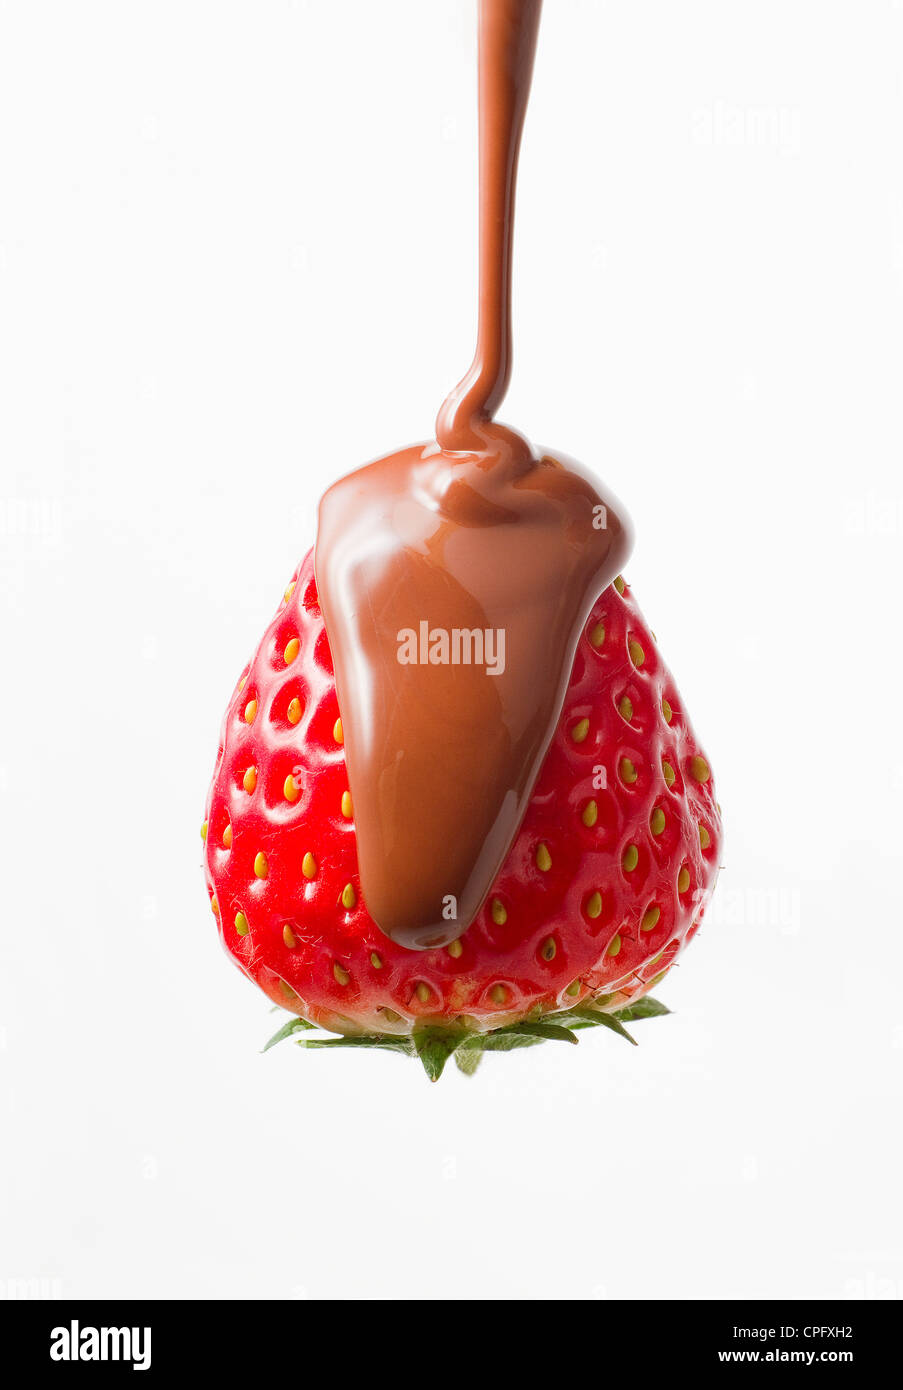 Chocolate Dropping On Strawberry With White Background In Behind Stock Photo